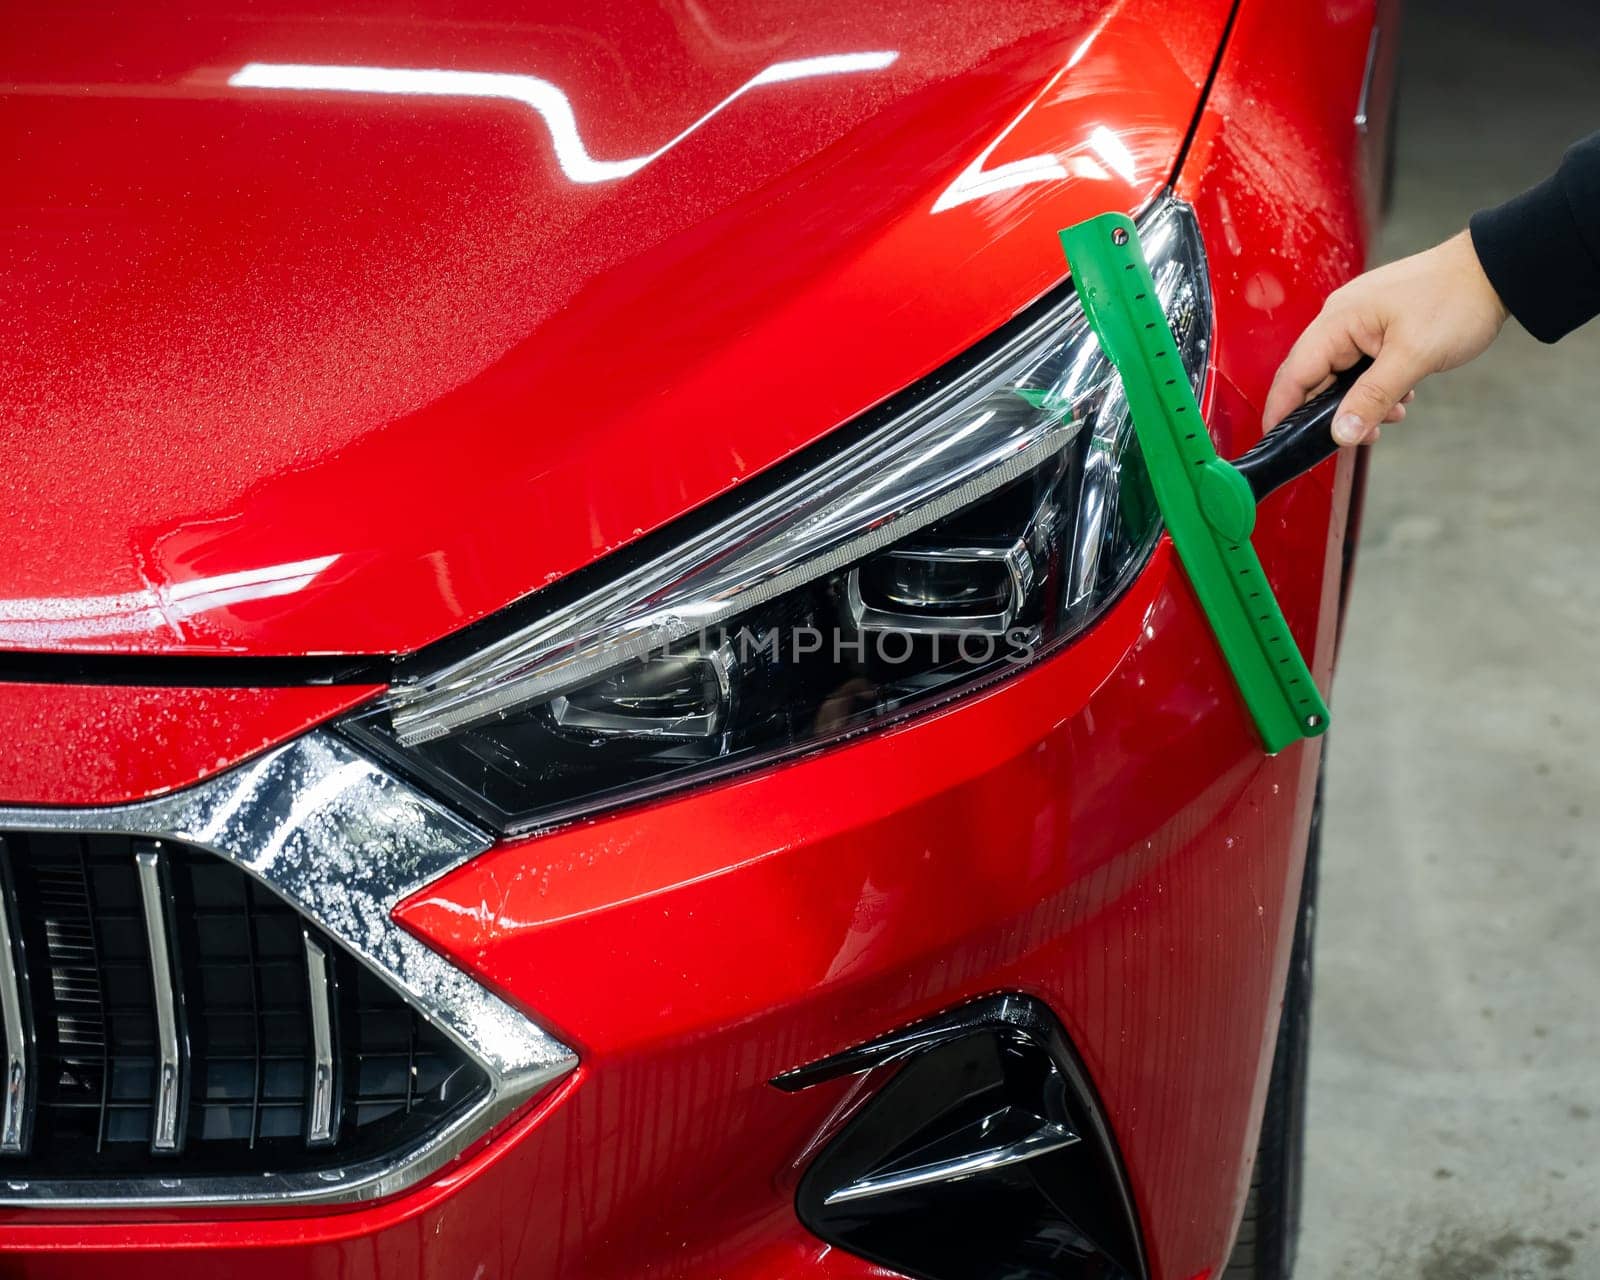 A man washes the headlights of a red car with a scraper